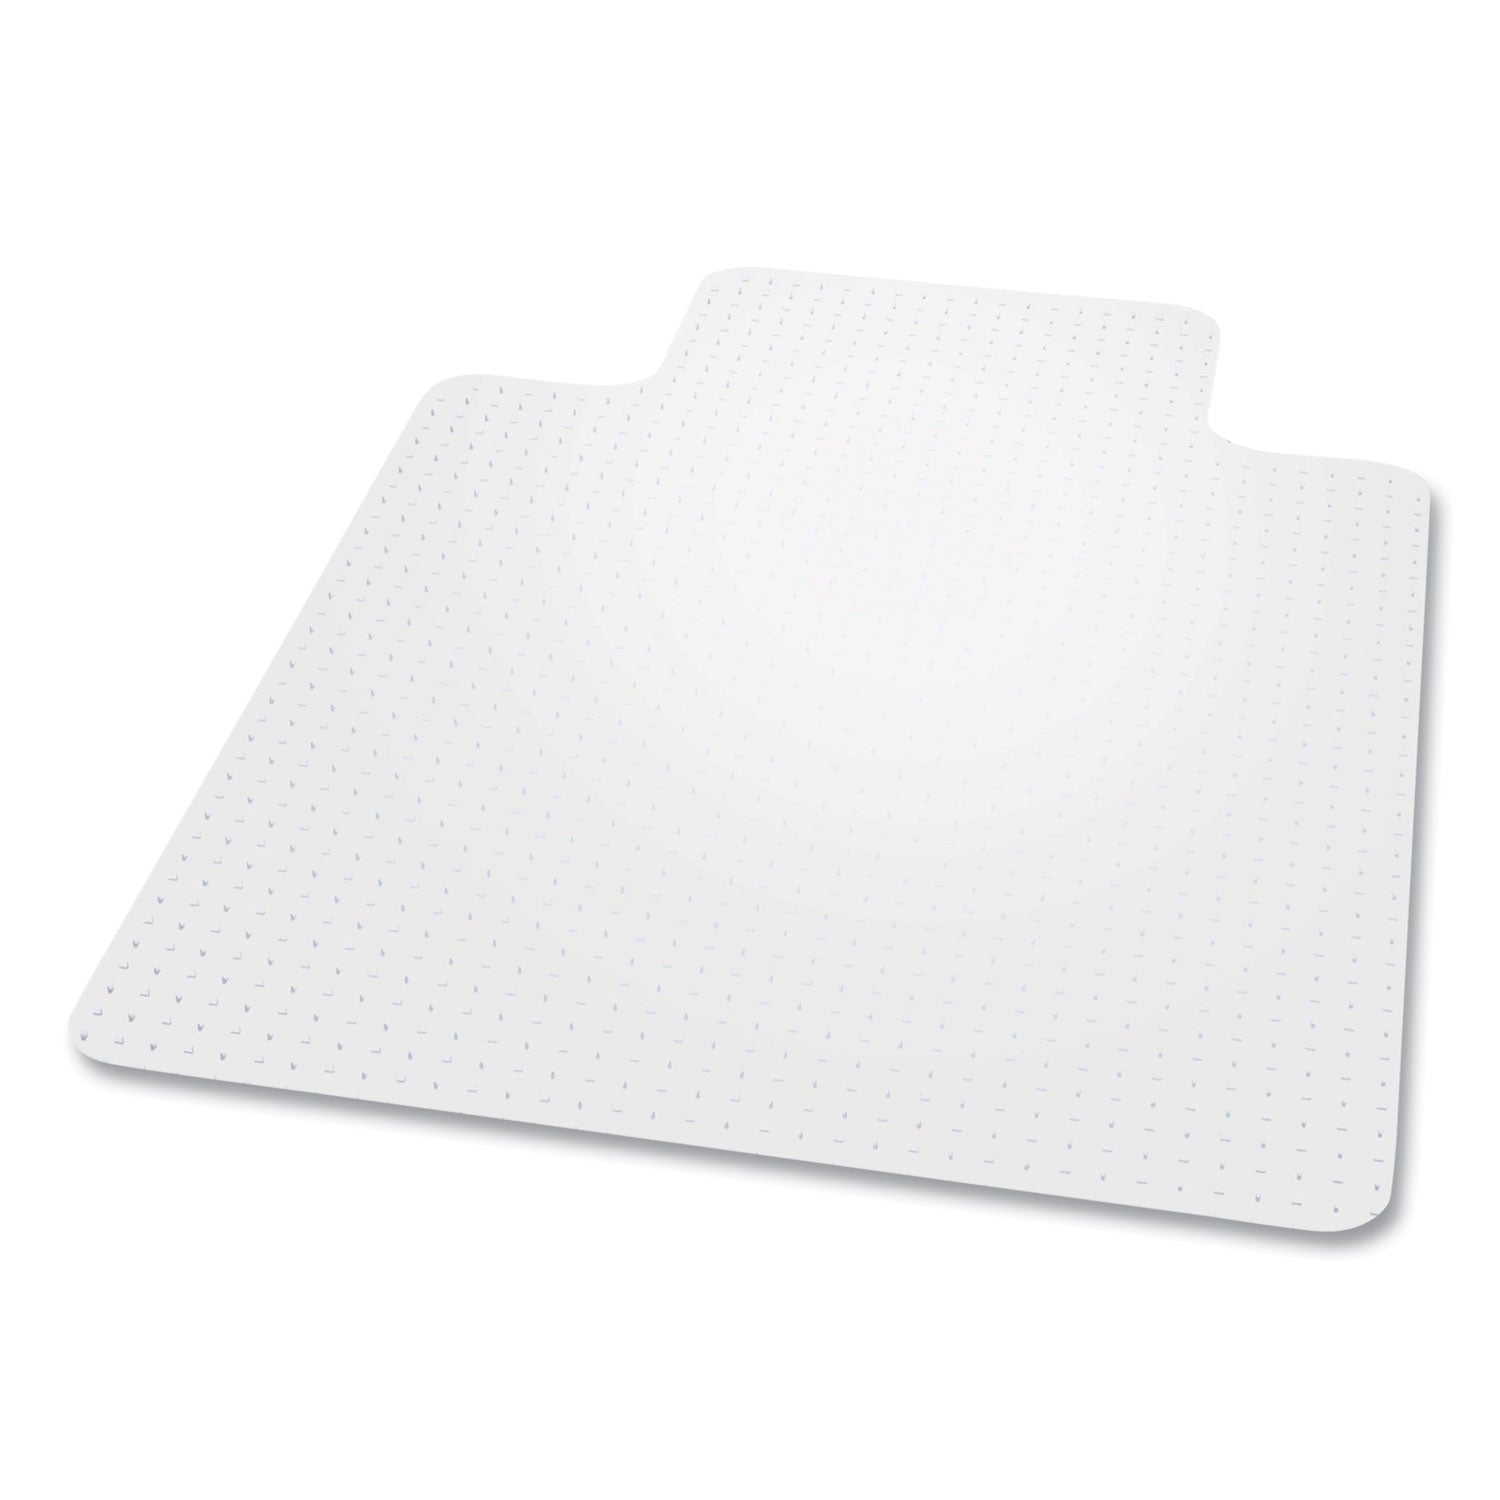 everlife-chair-mat-for-extra-high-pile-carpet-with-lip-46-x-60-clear-ships-in-4-6-business-days_esr124381 - 1